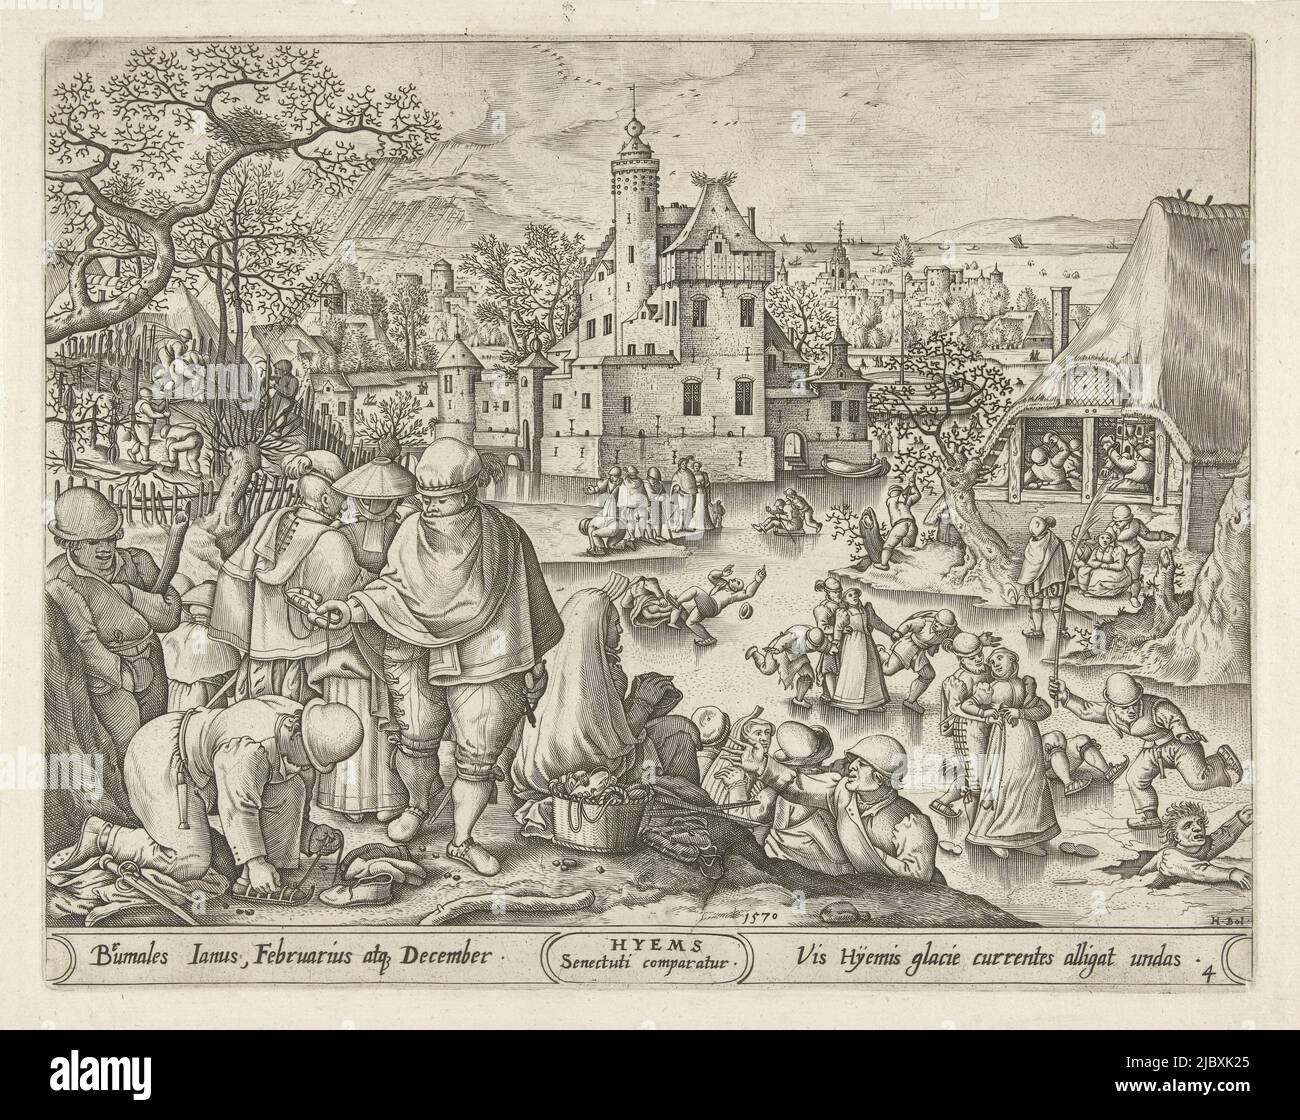 In a vast landscape, villagers carry out activities associated with the months of December, January and February. Near a castle, people are having fun on the ice. Beneath the scene is the title with two lines in Latin on either side. Print from a series of four prints depicting the four seasons, two after Hans Bol and two after Pieter Brueghel I., Winter Hyems  The four seasons (series title), print maker: Pieter van der Heyden, Hans Bol, (mentioned on object), Antwerp, in or after 1570, paper, engraving, h 227 mm × w 288 mm Stock Photo